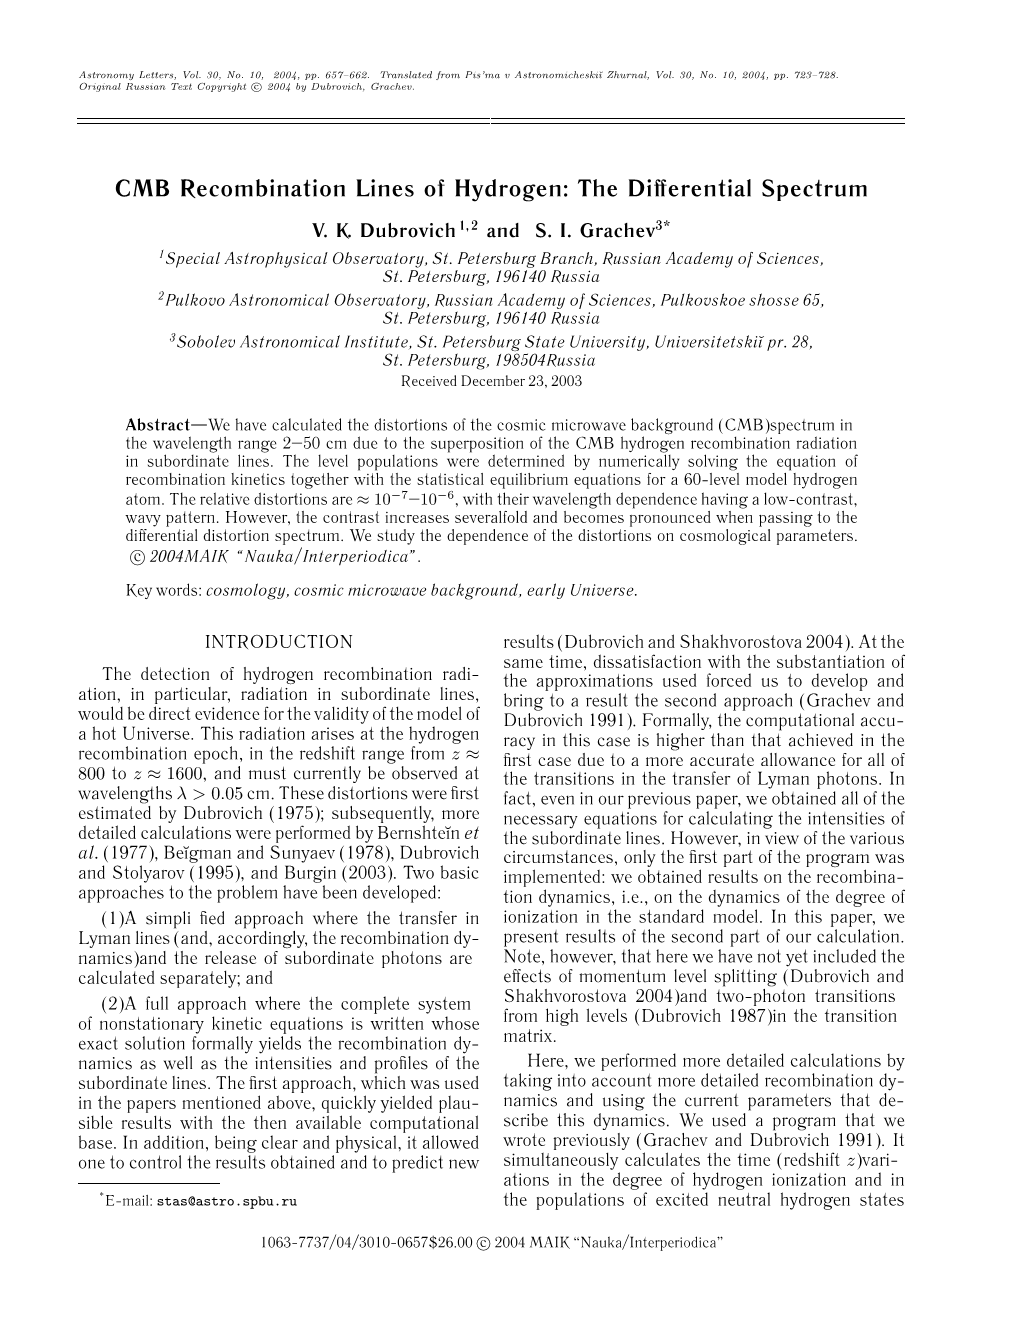 CMB Recombination Lines of Hydrogen: the Differential Spectrum